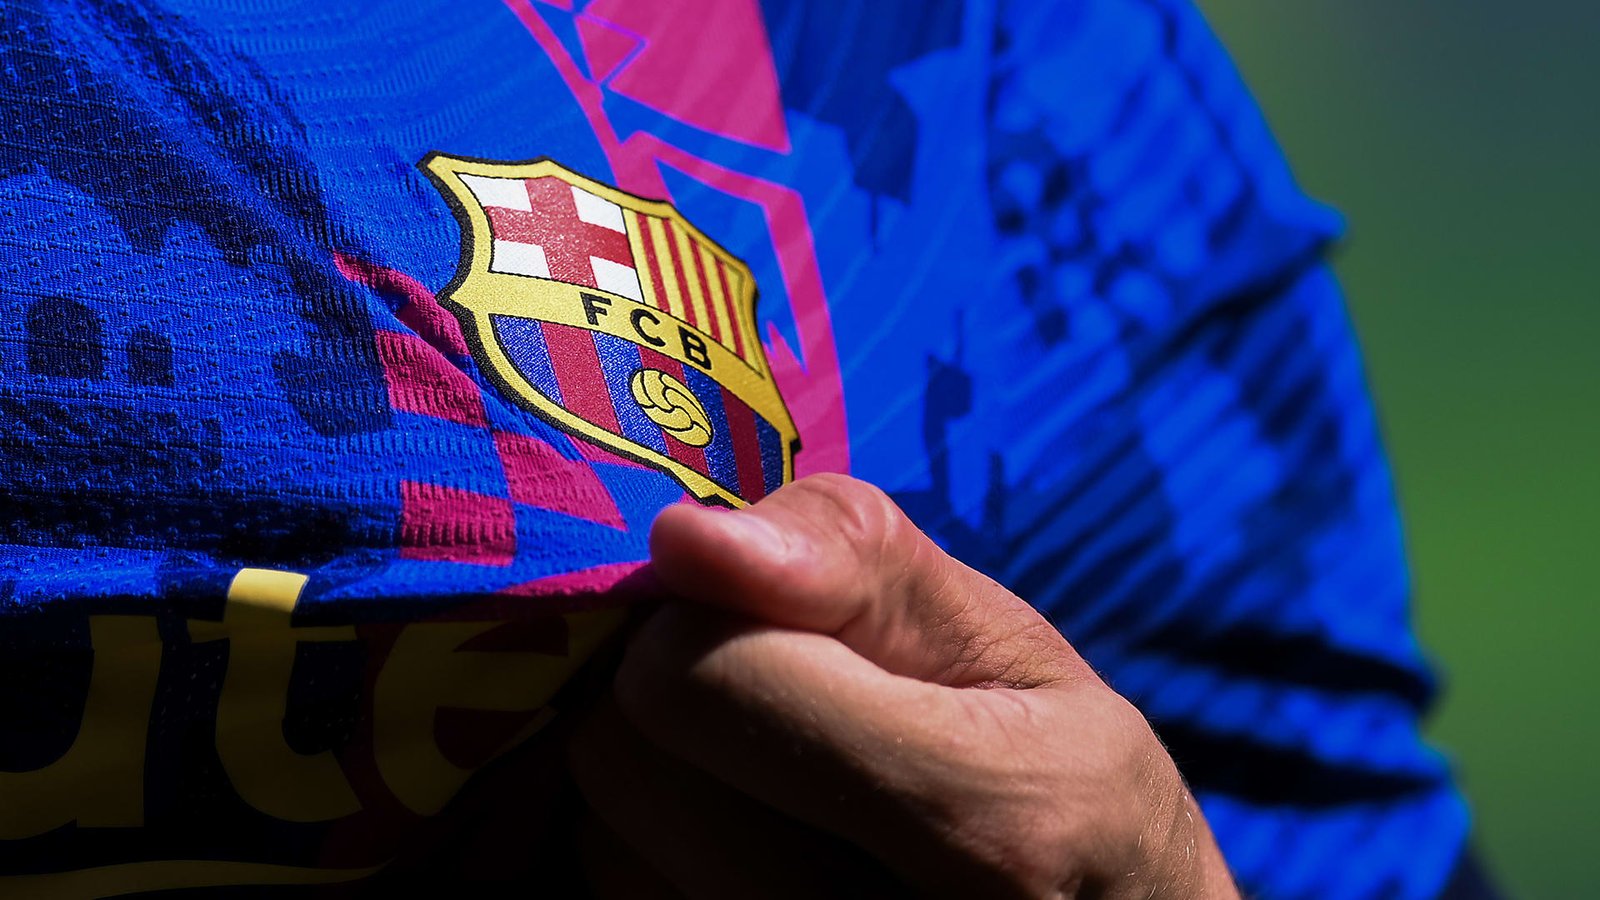 €57,692-A-Week FC Barcelona Player Set To Leave For Rivals